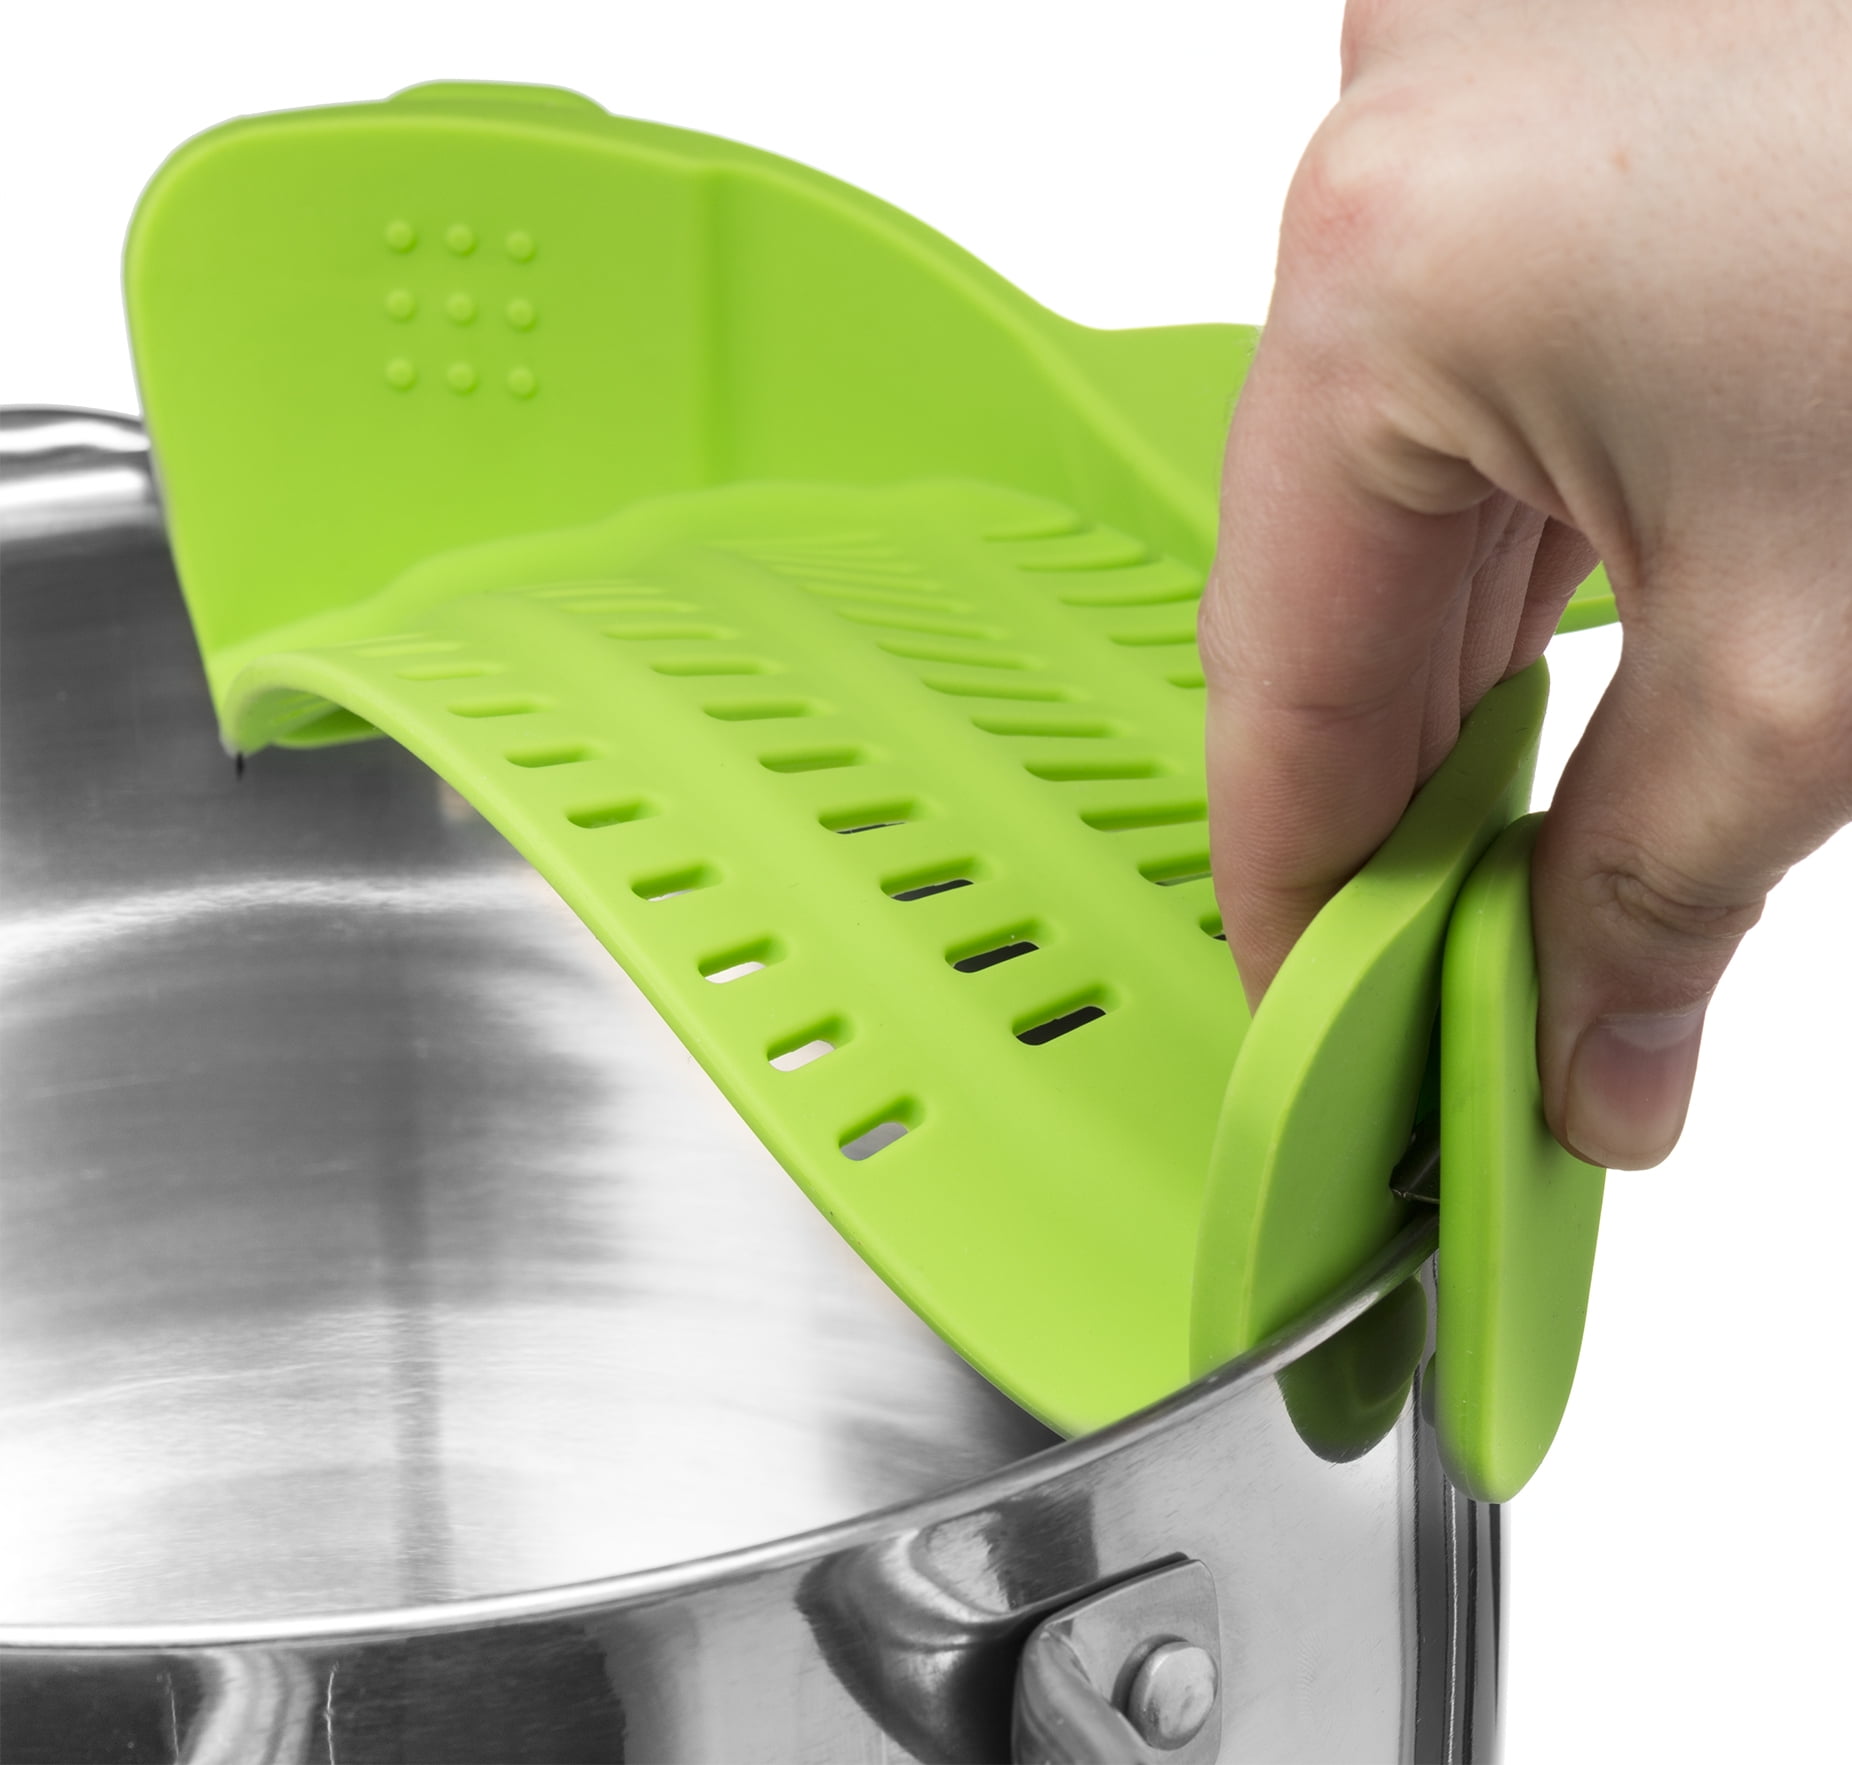 Kitchen Gizmo Snap N Strain Strainer - Clip on Silicone Colander Strainer -  Fits All Pots and Bowls - Green 